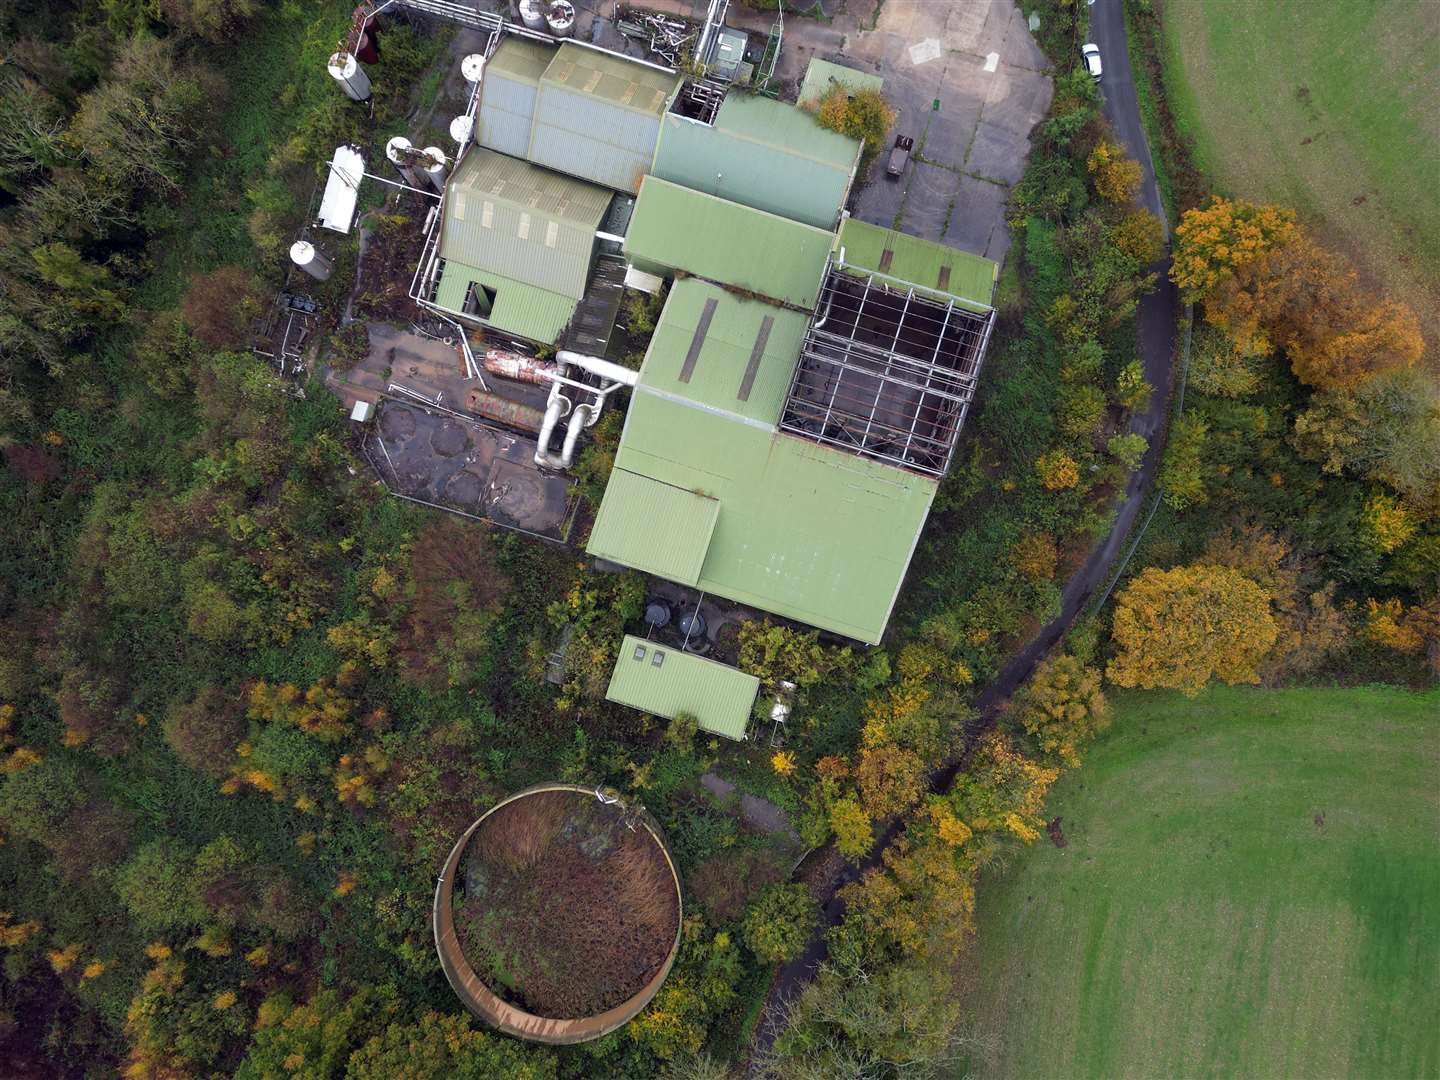 Wastewater works can be seen in the lower half of the aerial image. Picture: Barry Goodwin